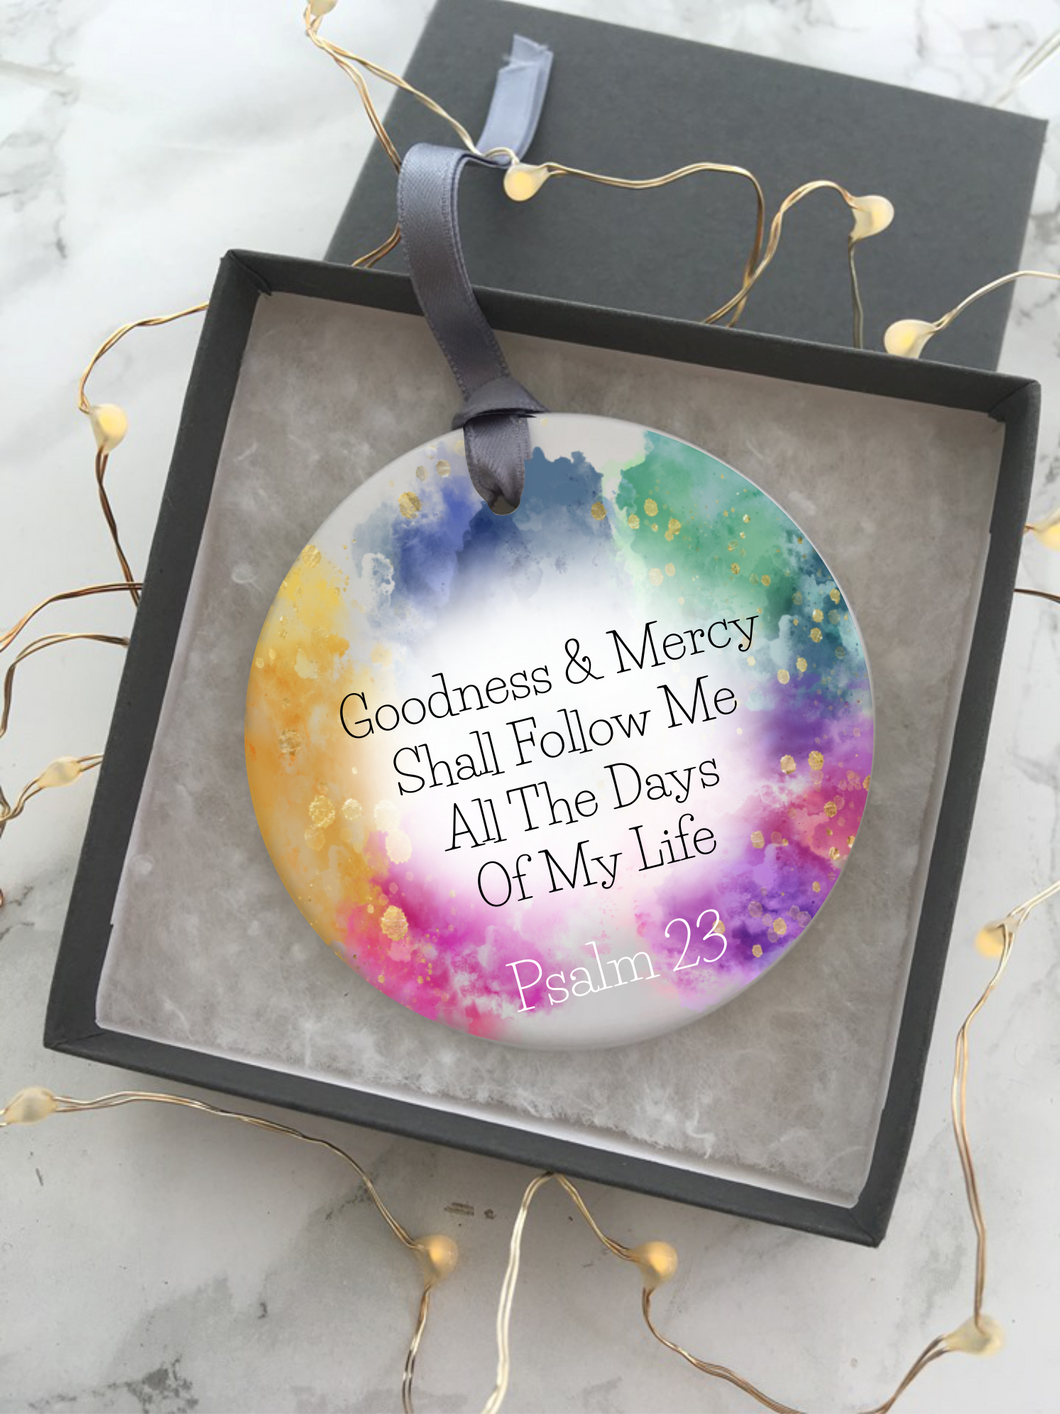 Psalm 23 Goodness & Mercy Shall Follow Me All The Days Of My Life - Religious Gift - Ceramic Hanging Decoration